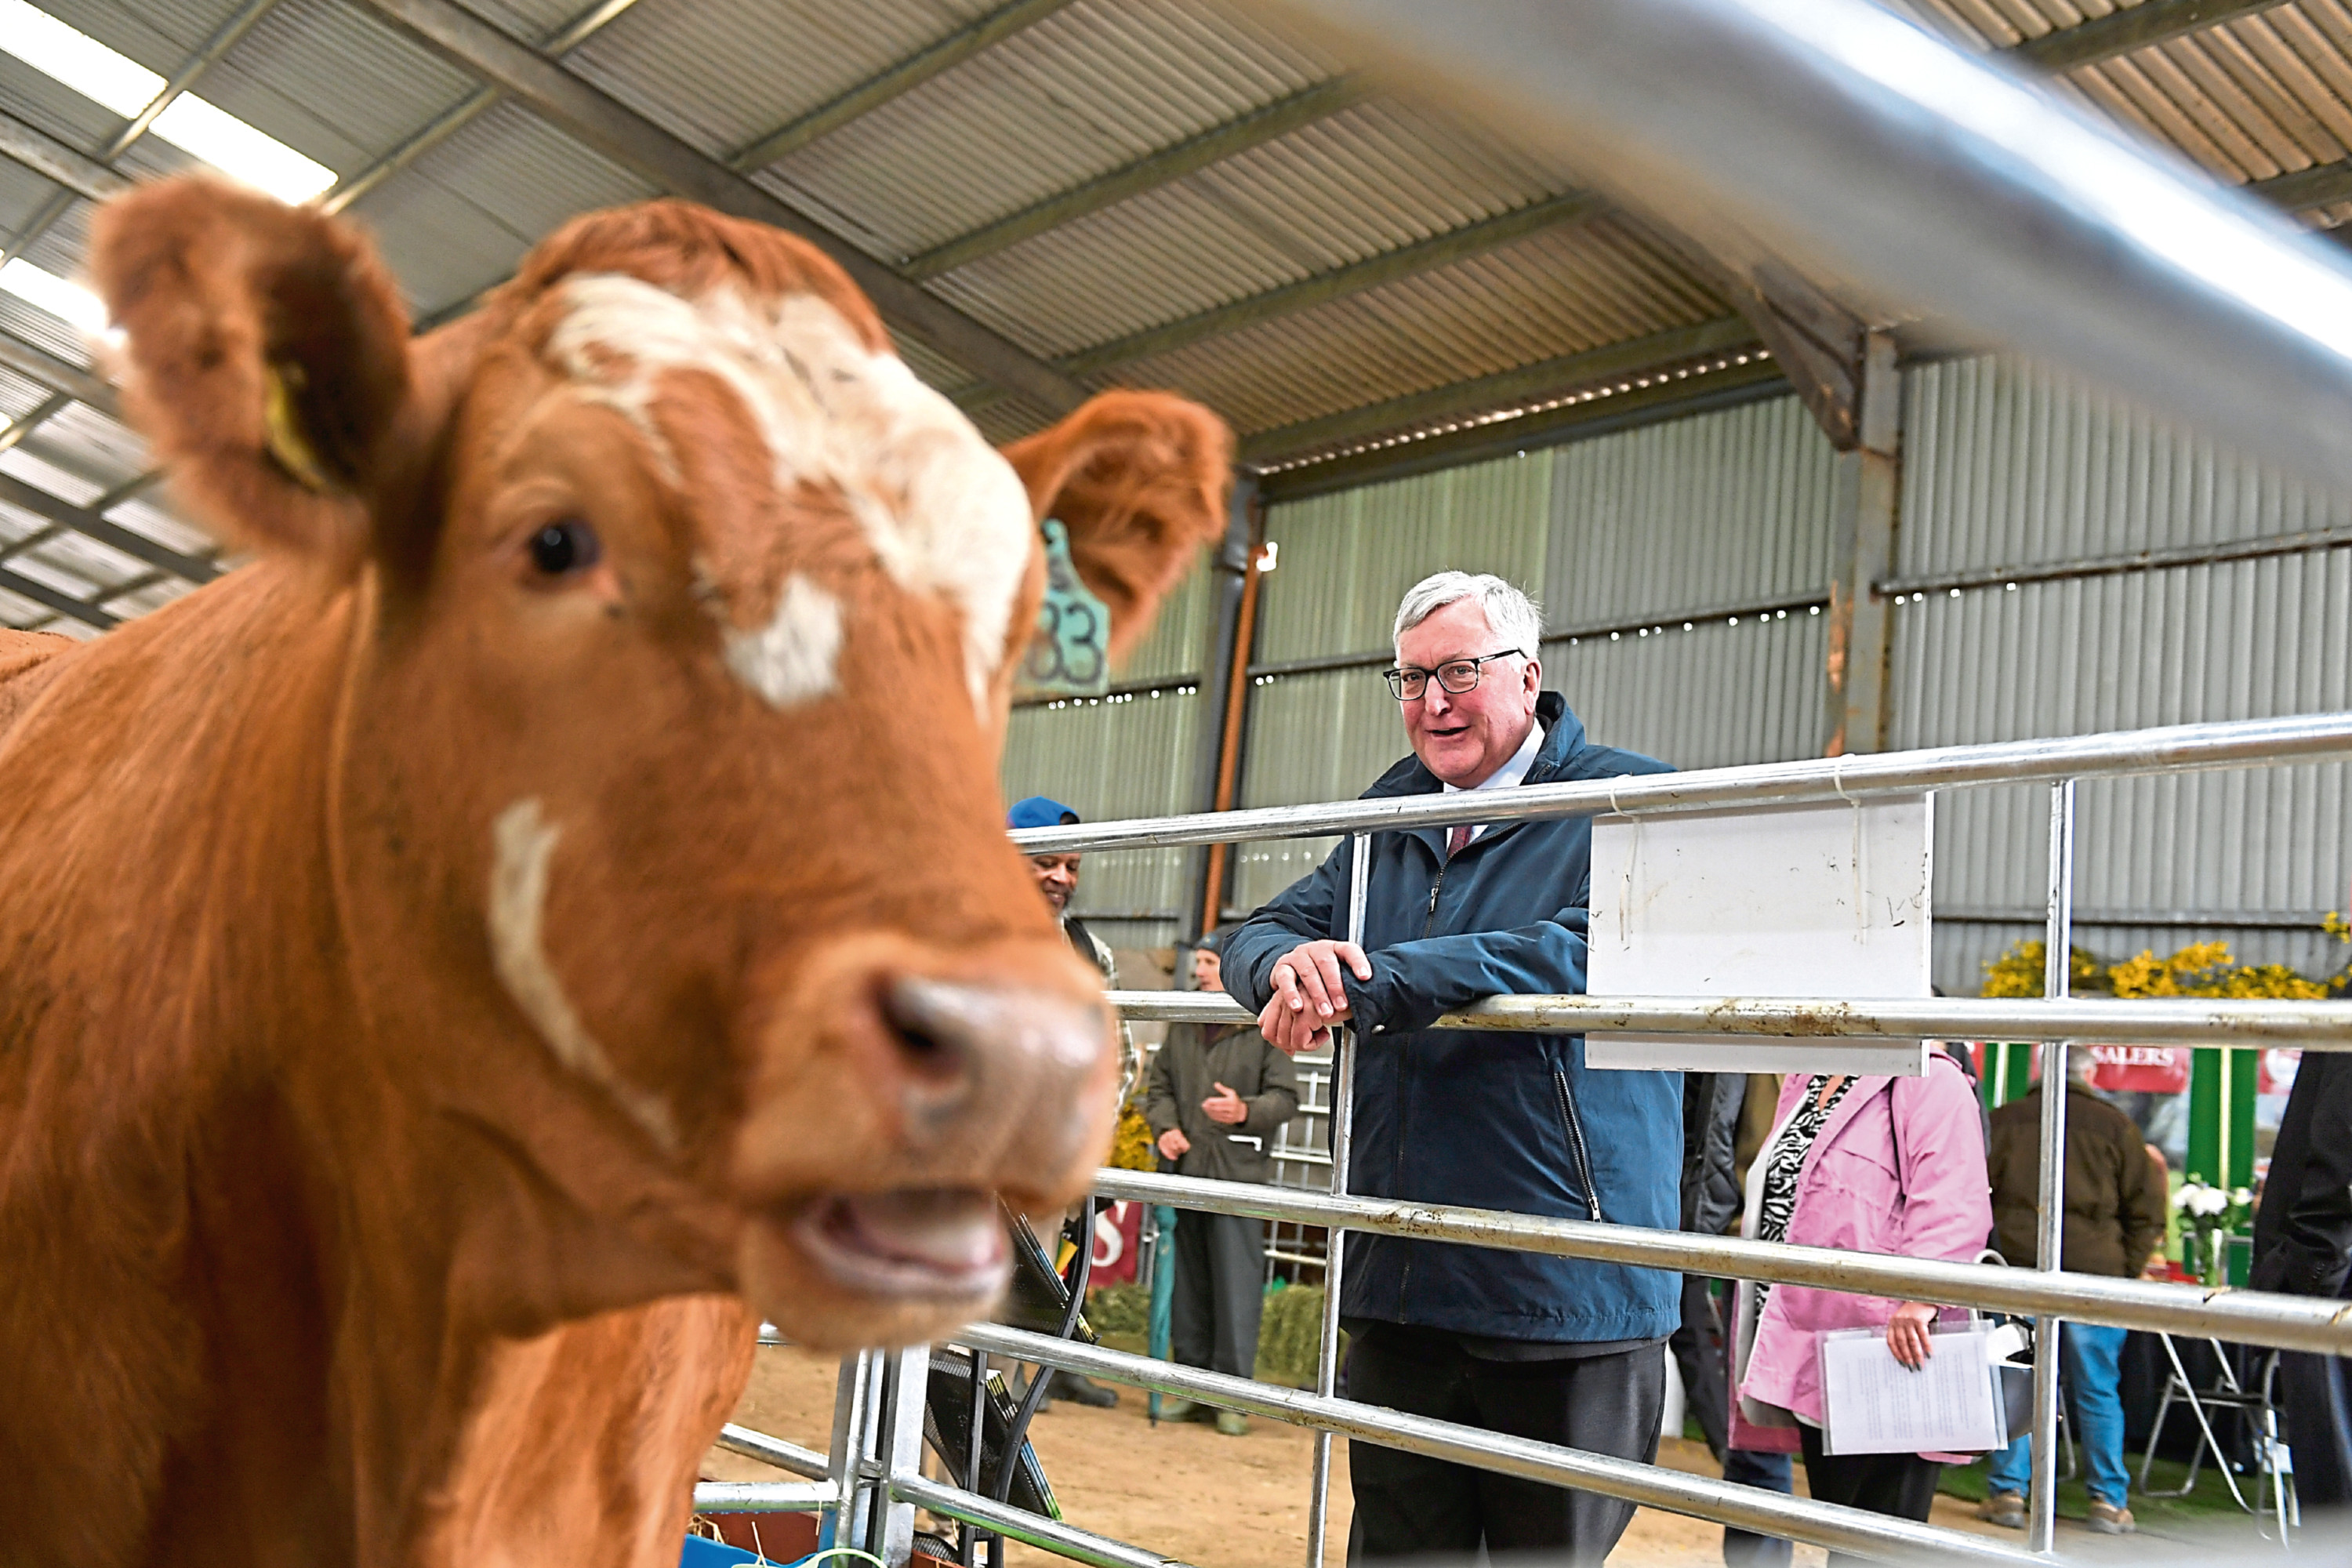 Fergus Ewing is to chair a Beef Summit in Stirling Agricultural Centre.